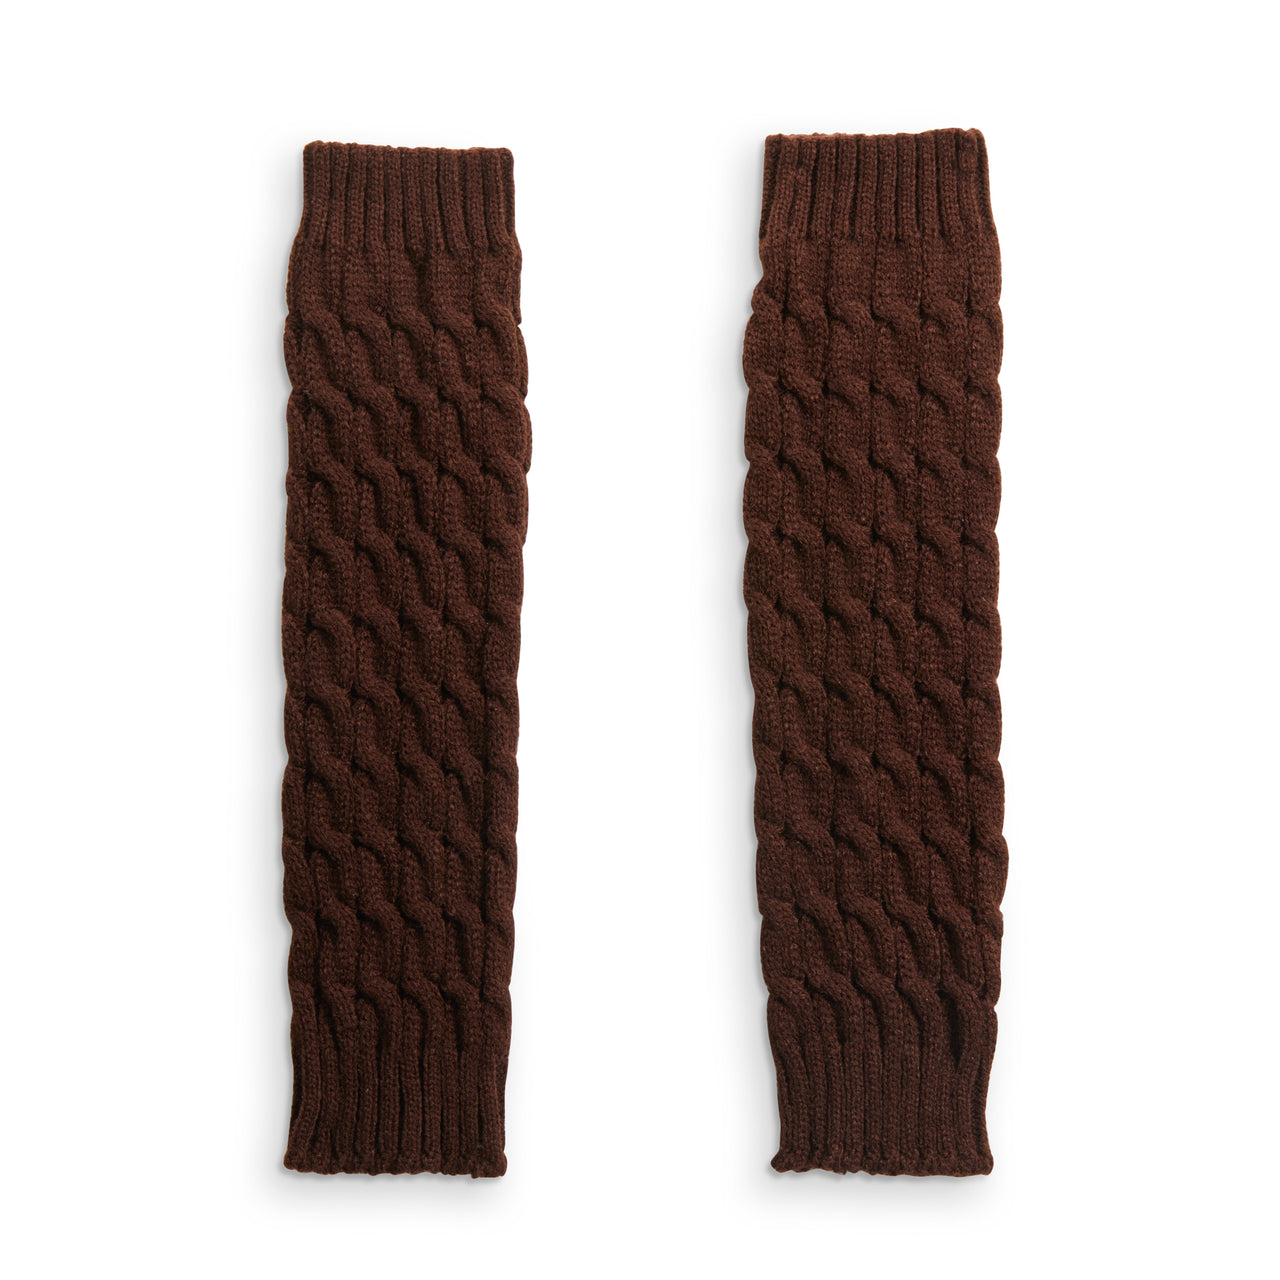 Chocolate Cable Knit Limb Warmers